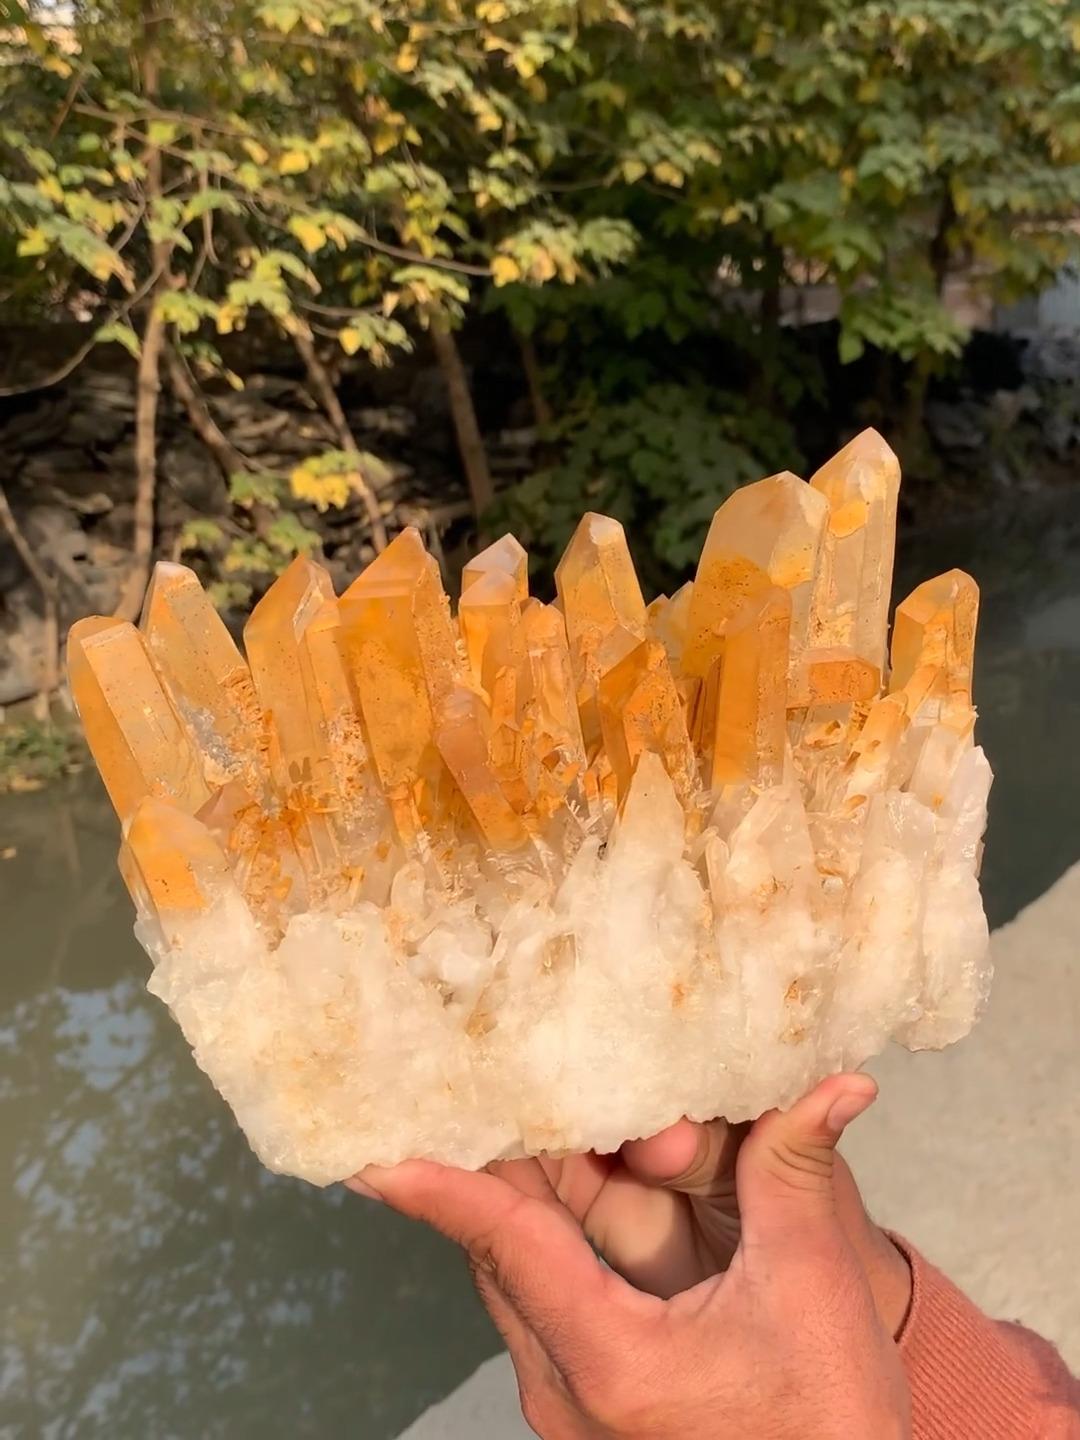 Art Deco Robust Cluster Of Elongated Quartz Crystal With Iron-Oxide Coating From Pakistan For Sale